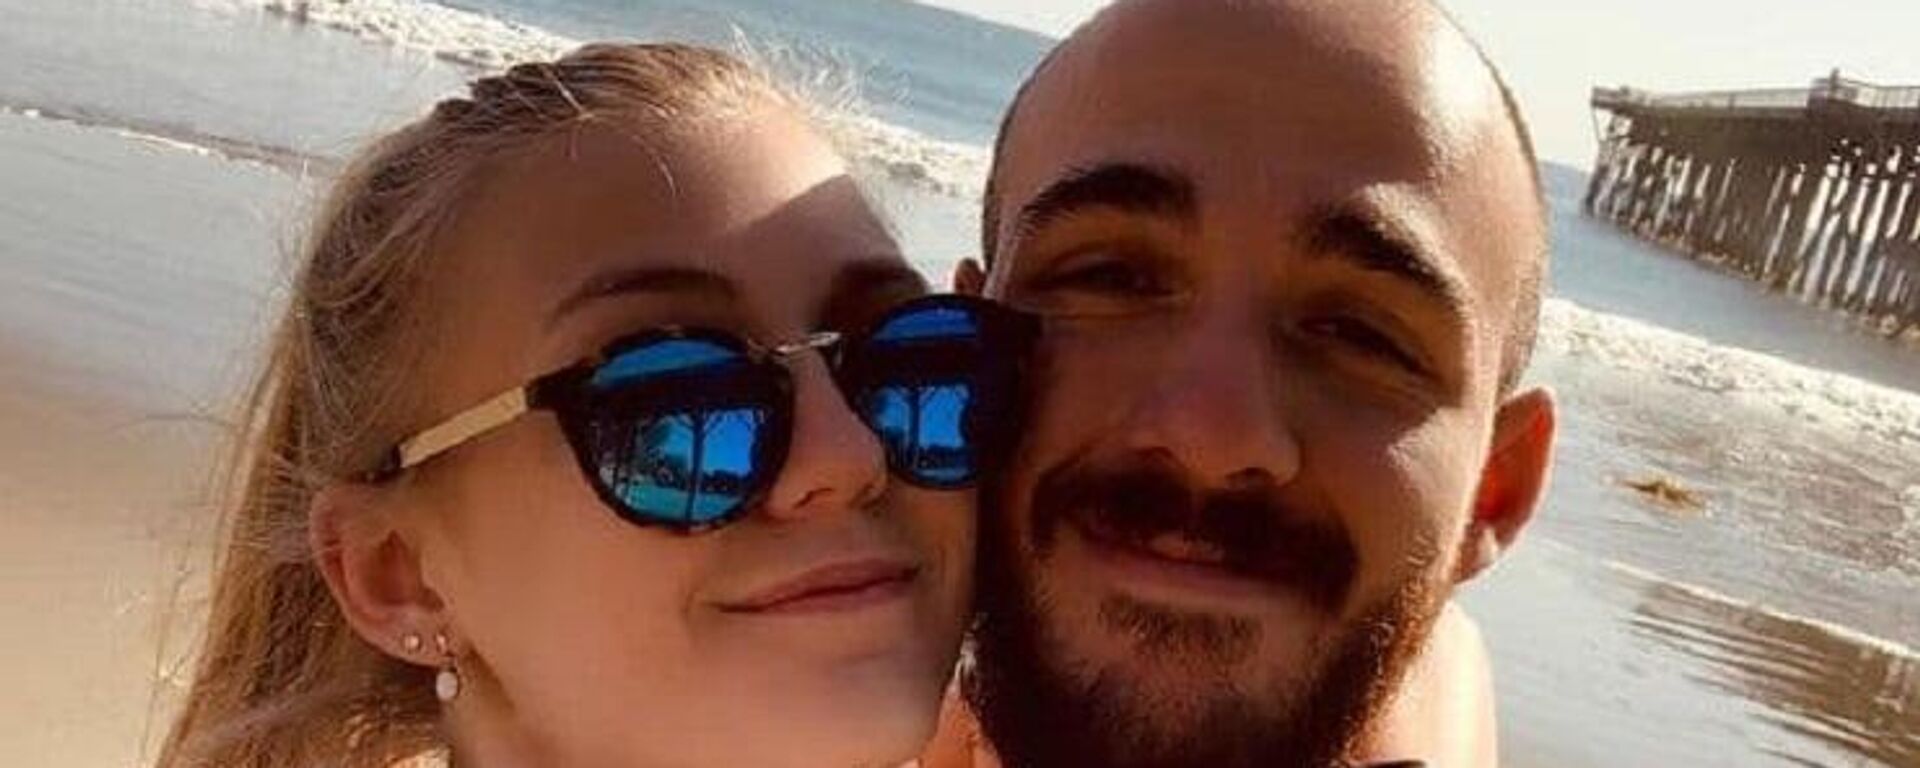 An Instagram photo of missing woman Gabrielle Petito and her boyfriend Brian Laundrie on March 18, 2020 - Sputnik International, 1920, 21.09.2021